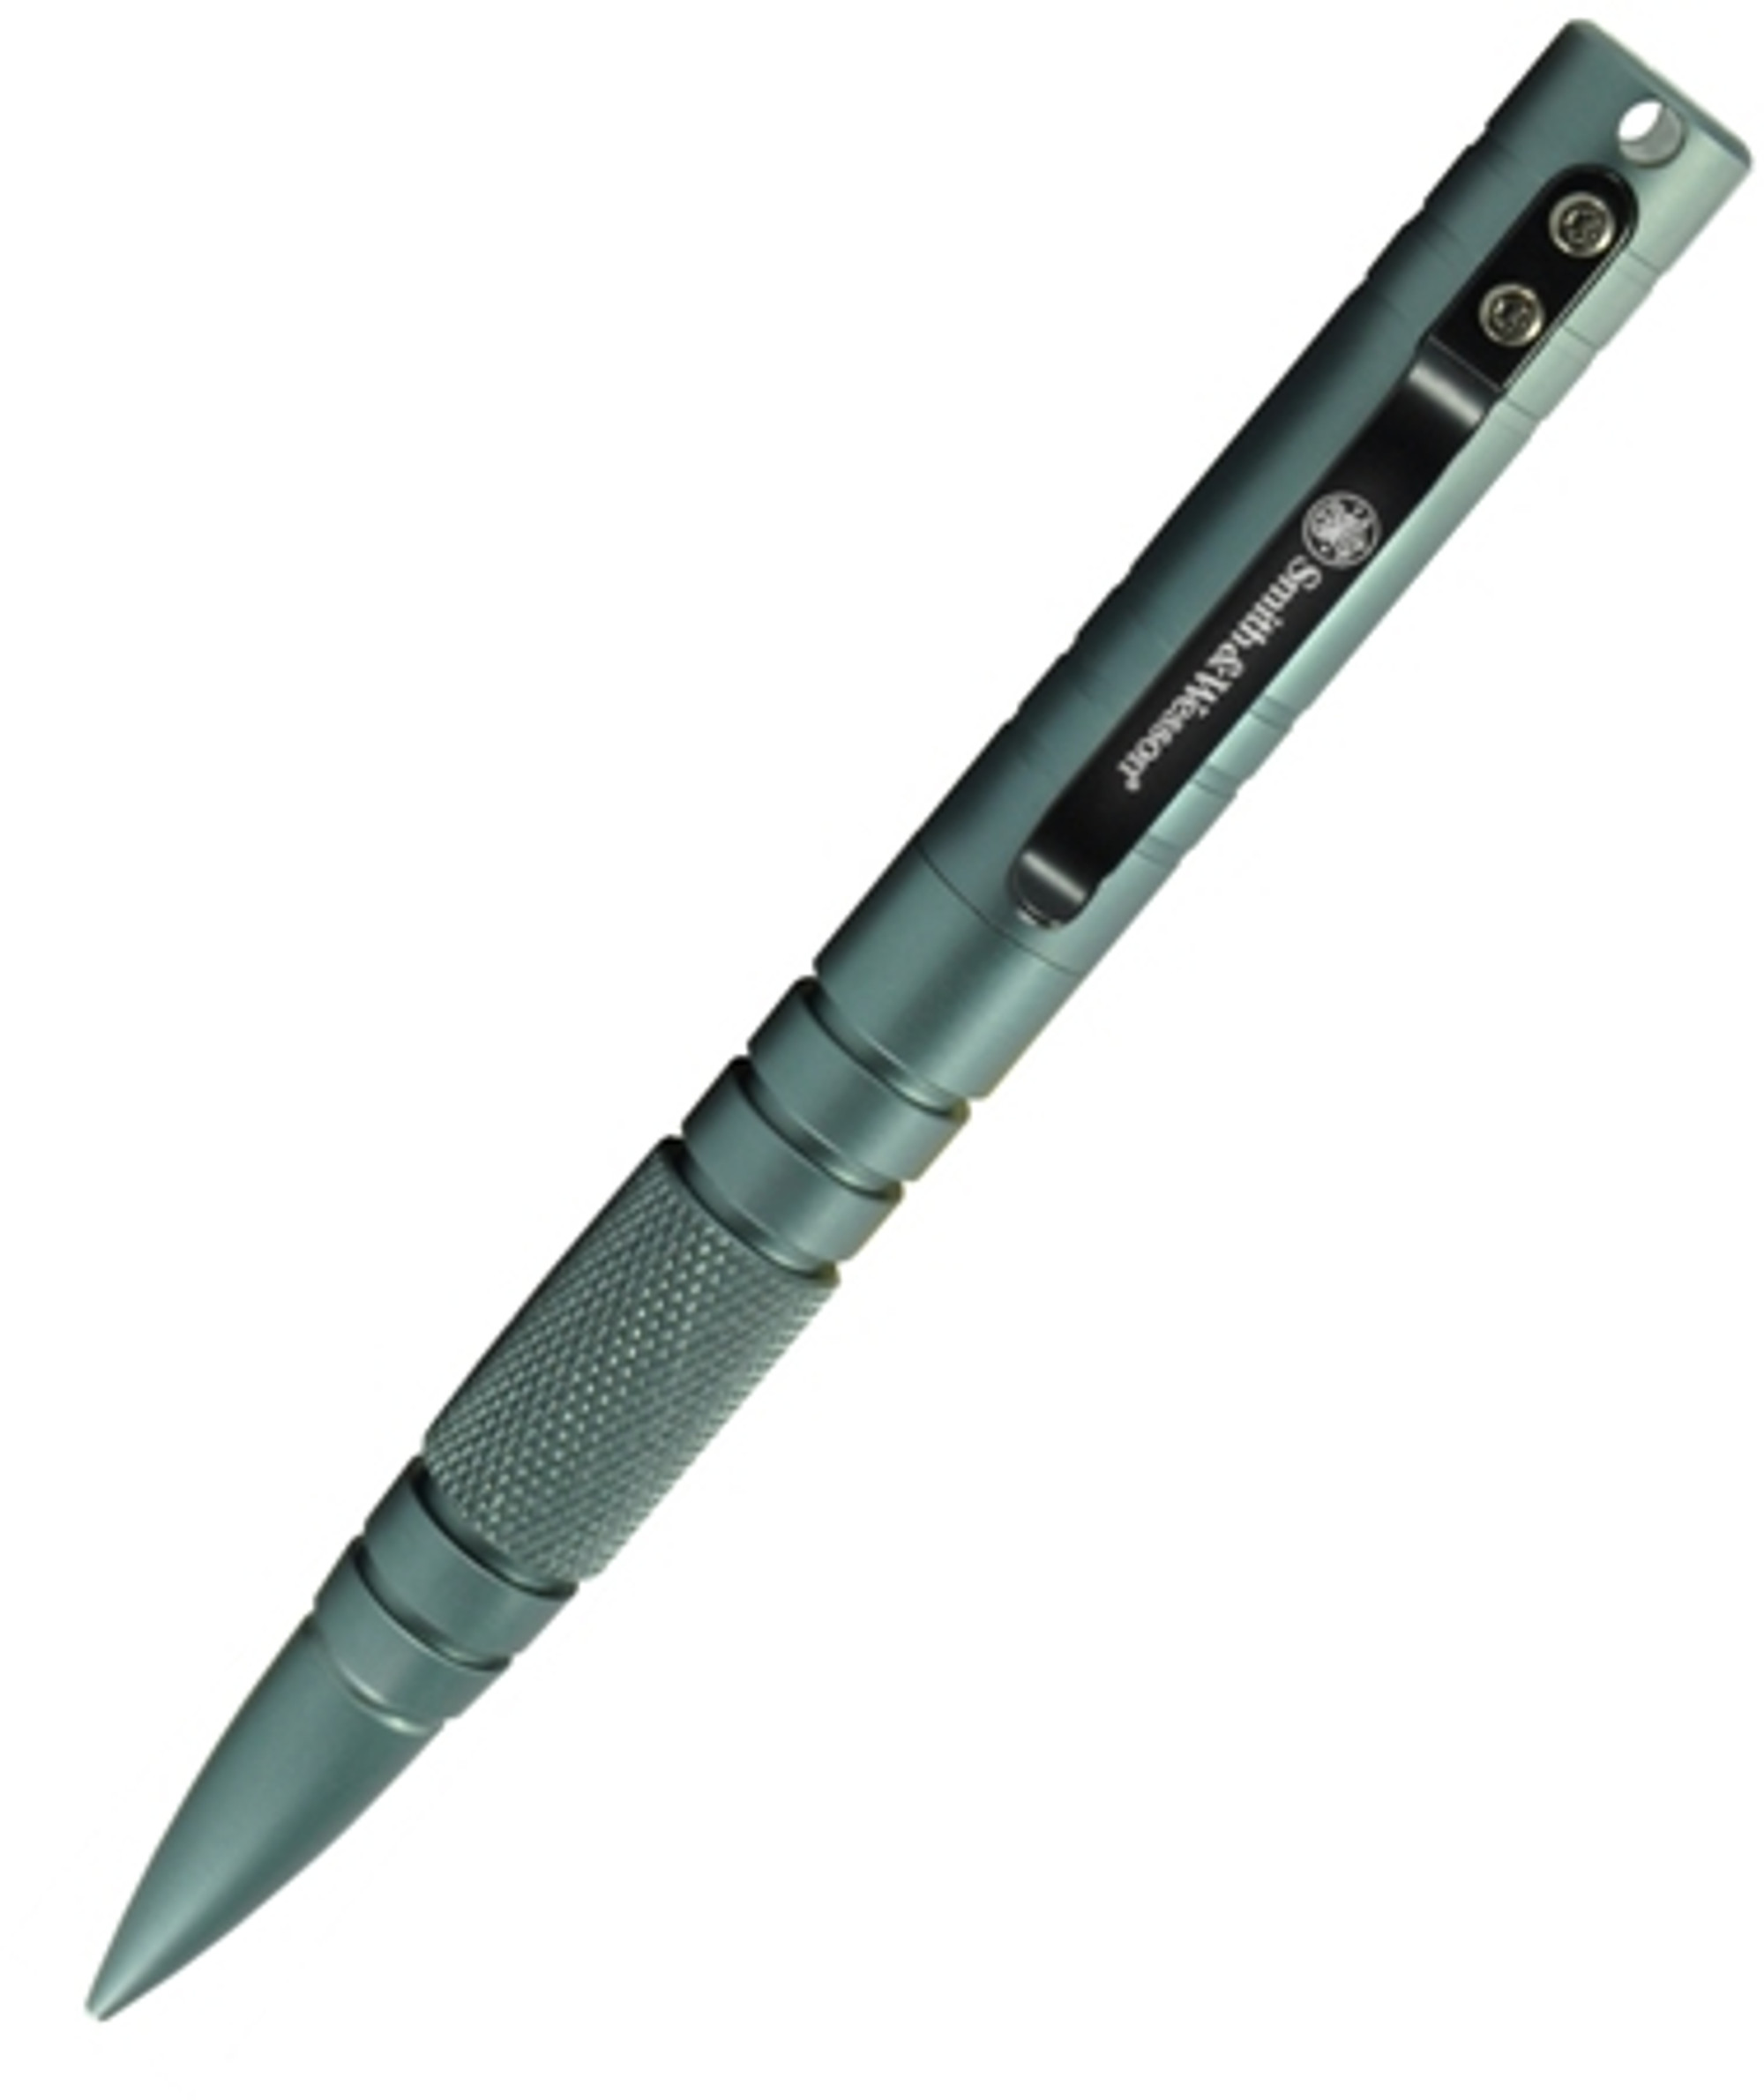 Smith & Wesson Military Police Tactical Pen - Olive Drab